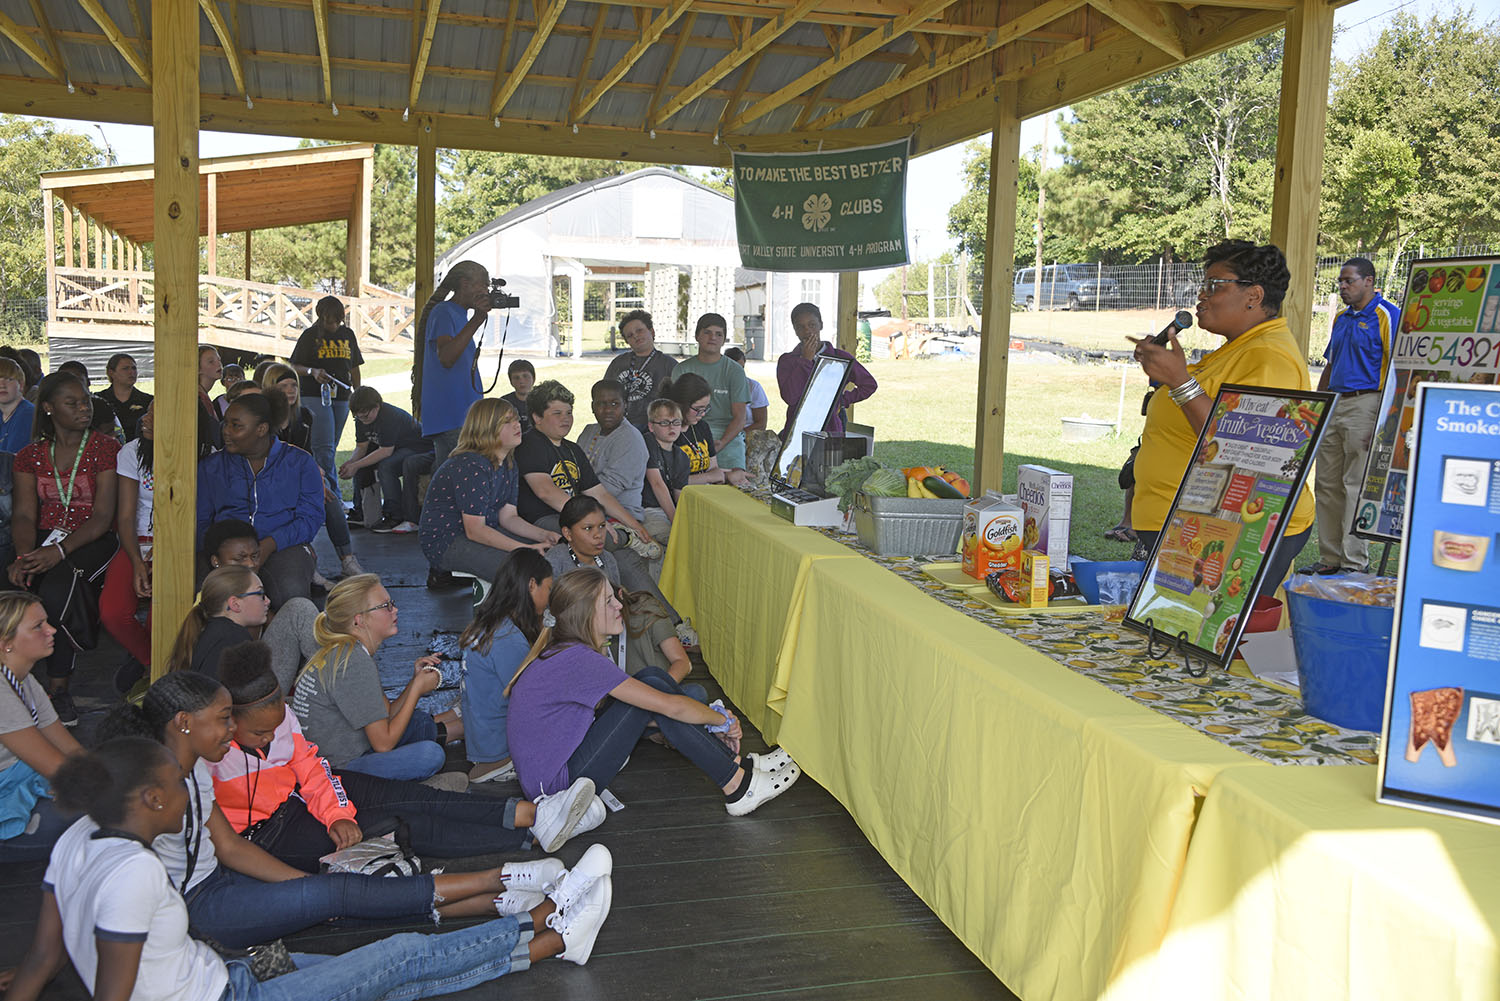 Kena Torbert, family life specialist for Fort Valley State University’s Cooperative Extension Program, explains the benefits of healthy eating to Worth County Middle School students during the FVSU Wal-Mart Foundation 4-H Healthy Habits 2020 Grant Project Kickoff event. The activity recently took place at the FVSU 4-H/AG Village Community Garden in Sylvester.